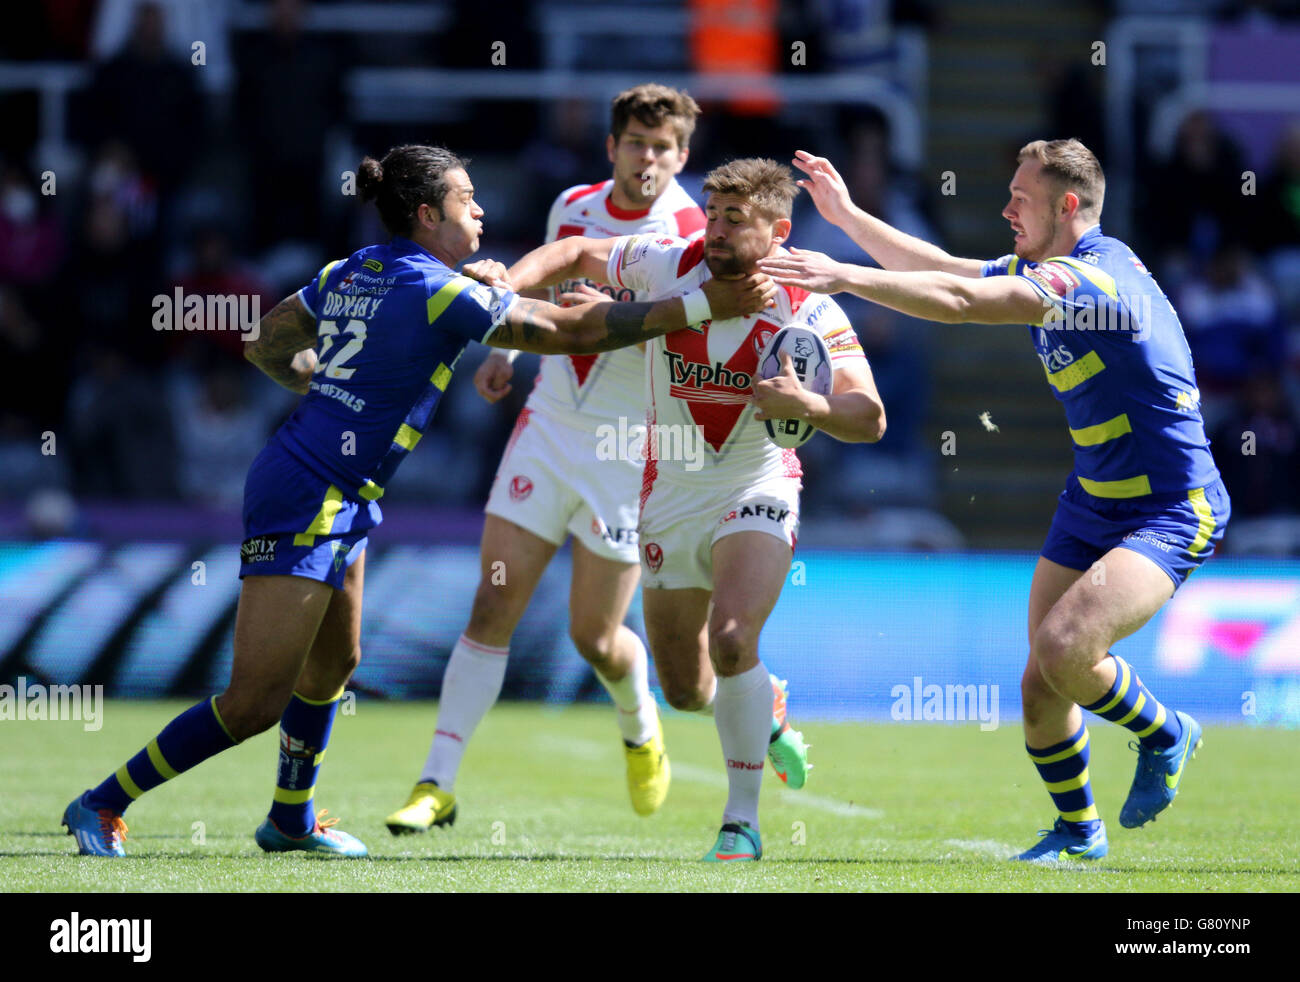 St. Helens Tom Makinson is tackled by Warrington's Gene Ormsby and Ben Currie during the Magic Weekend match at St James' Park, Newcastle. Stock Photo